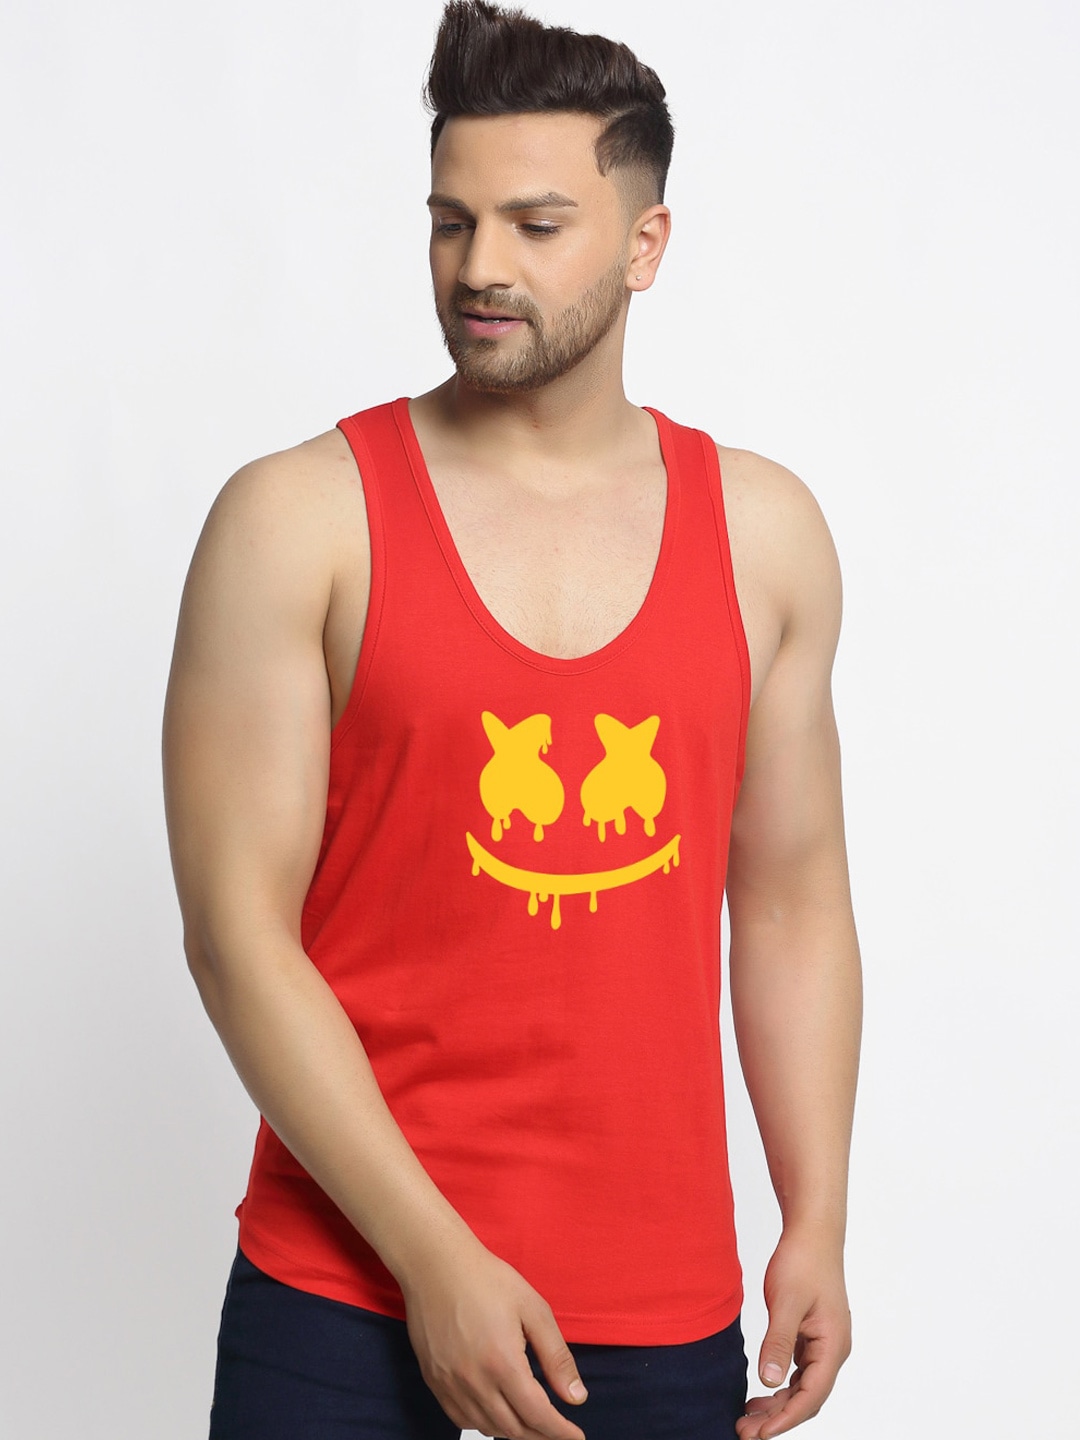 Clothing Innerwear Vests | Friskers Men Red & Yellow Printed Pure Cotton Gym Vest - VW05052